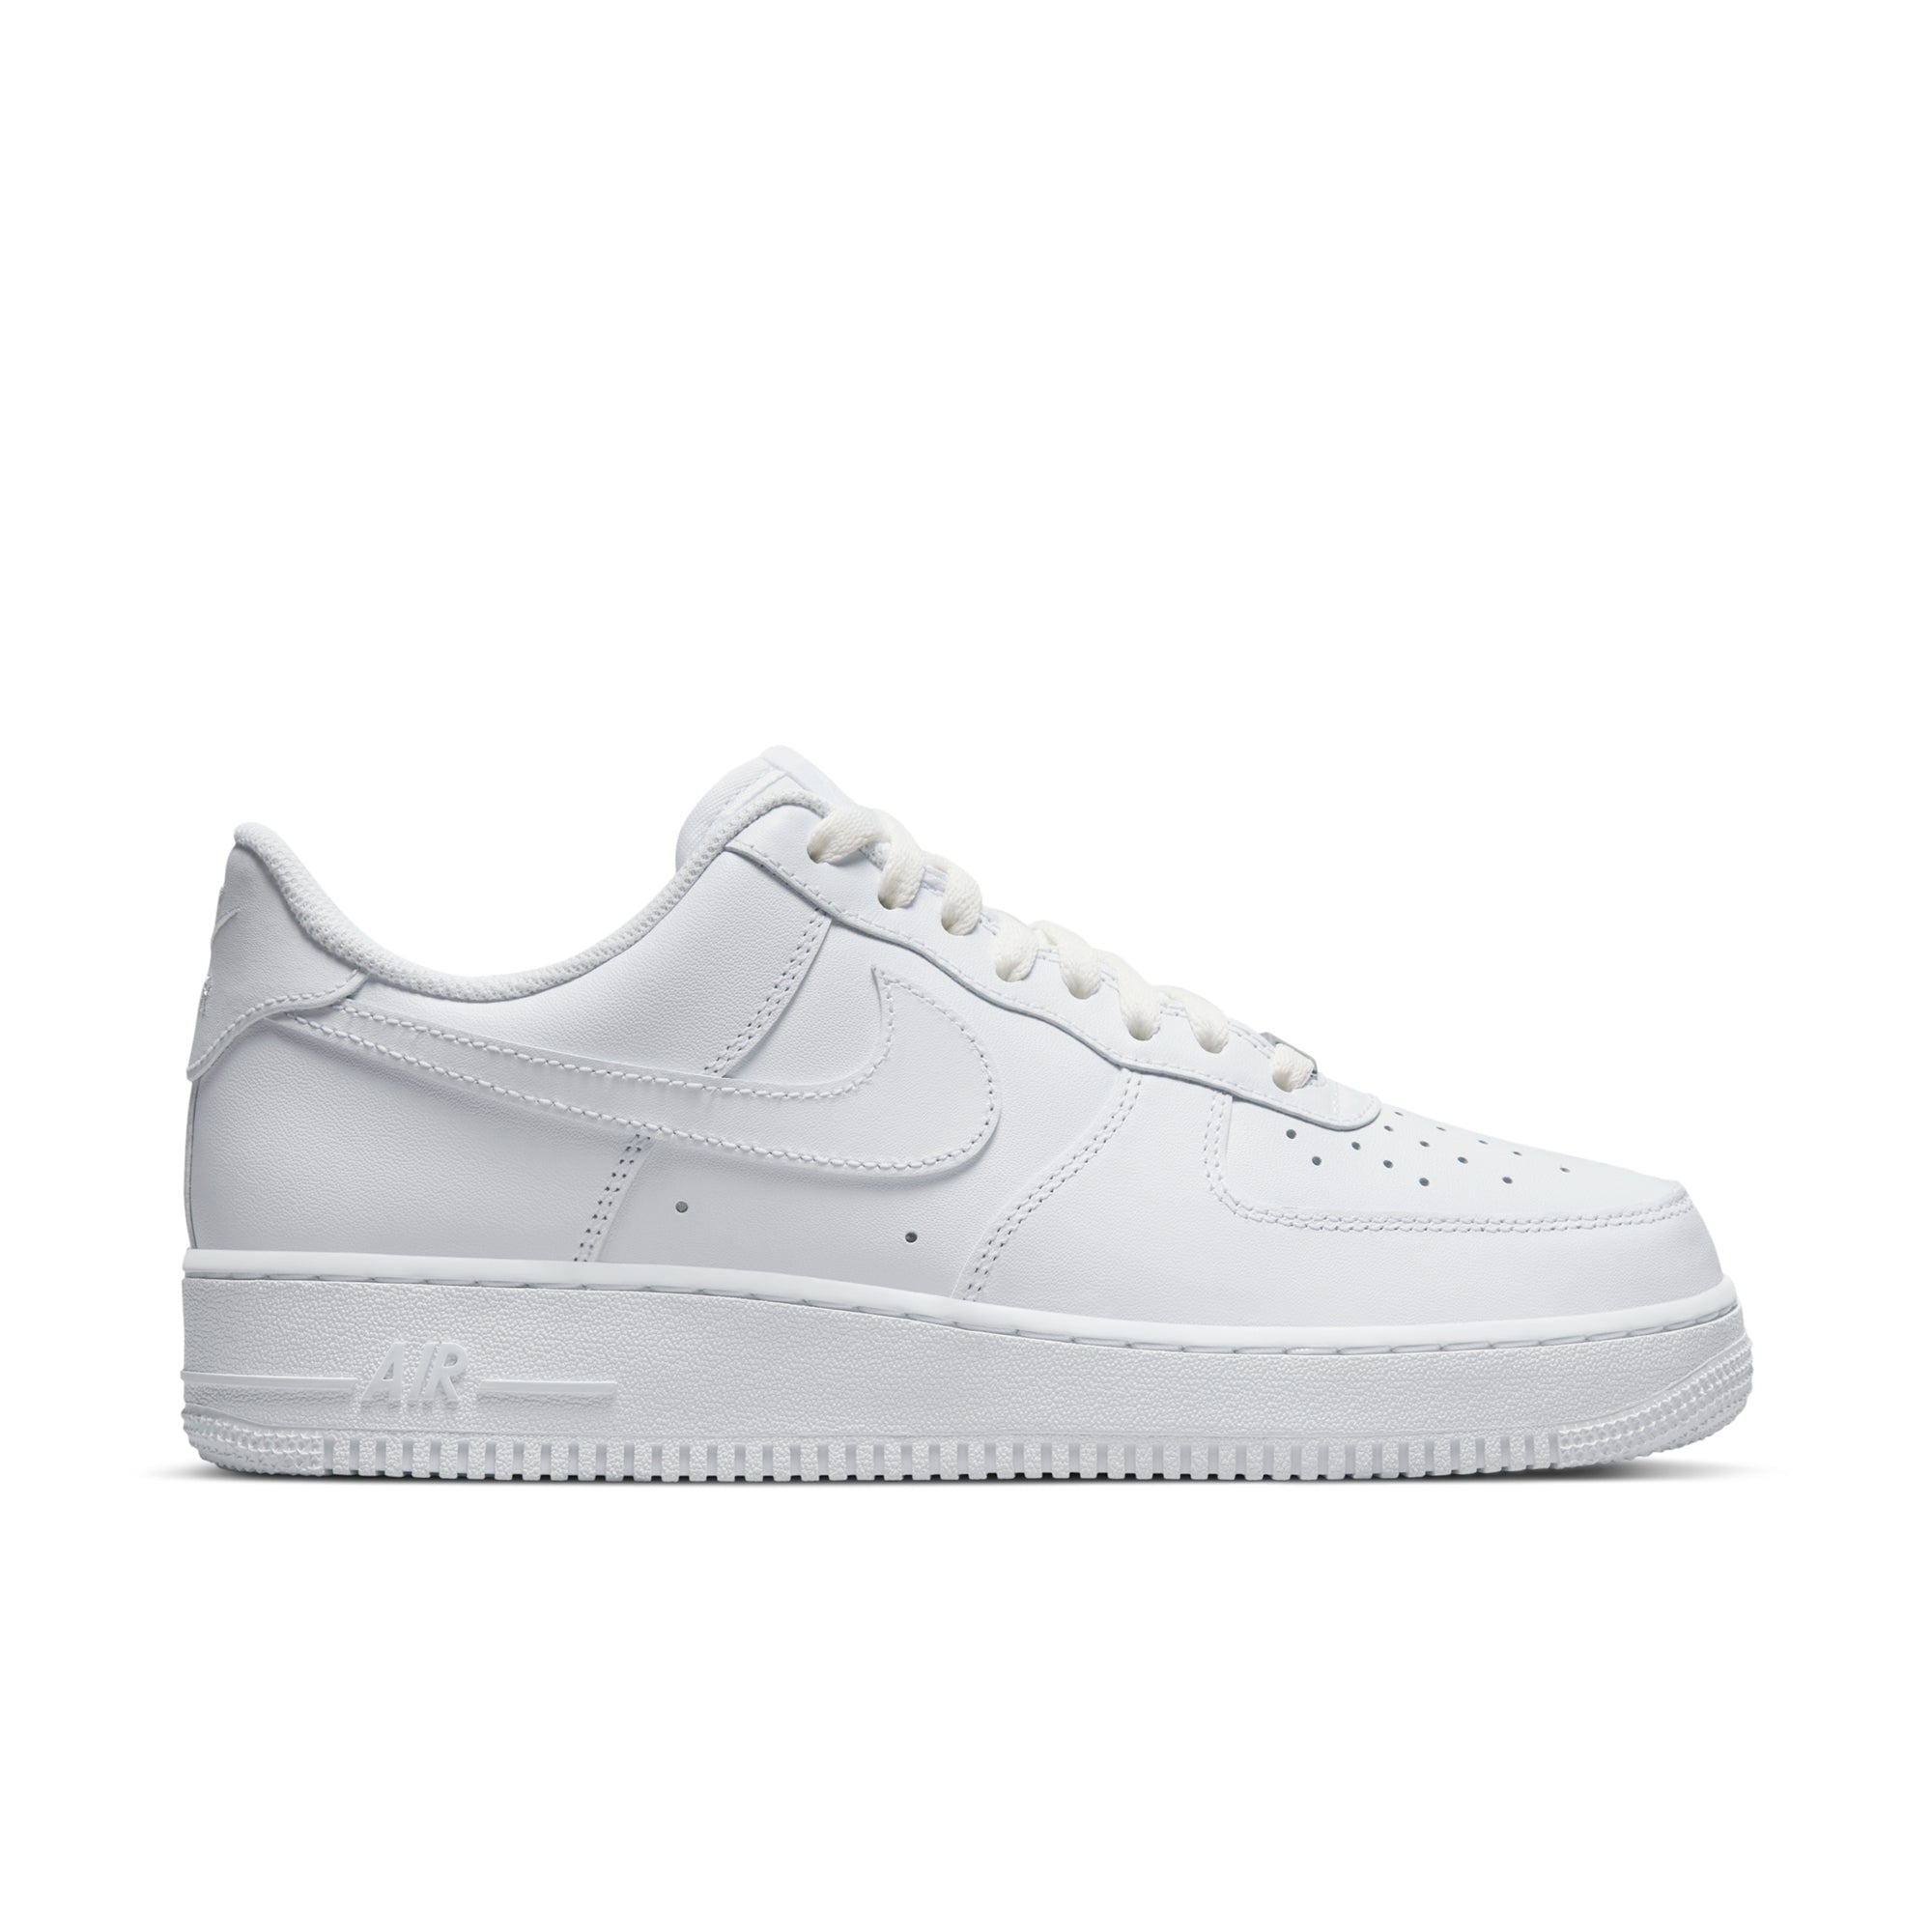 nike air force 1 low black and white Nike Air Force 1 Low '07 White | CW2288-111 42.5 - Livrare express 24 ore